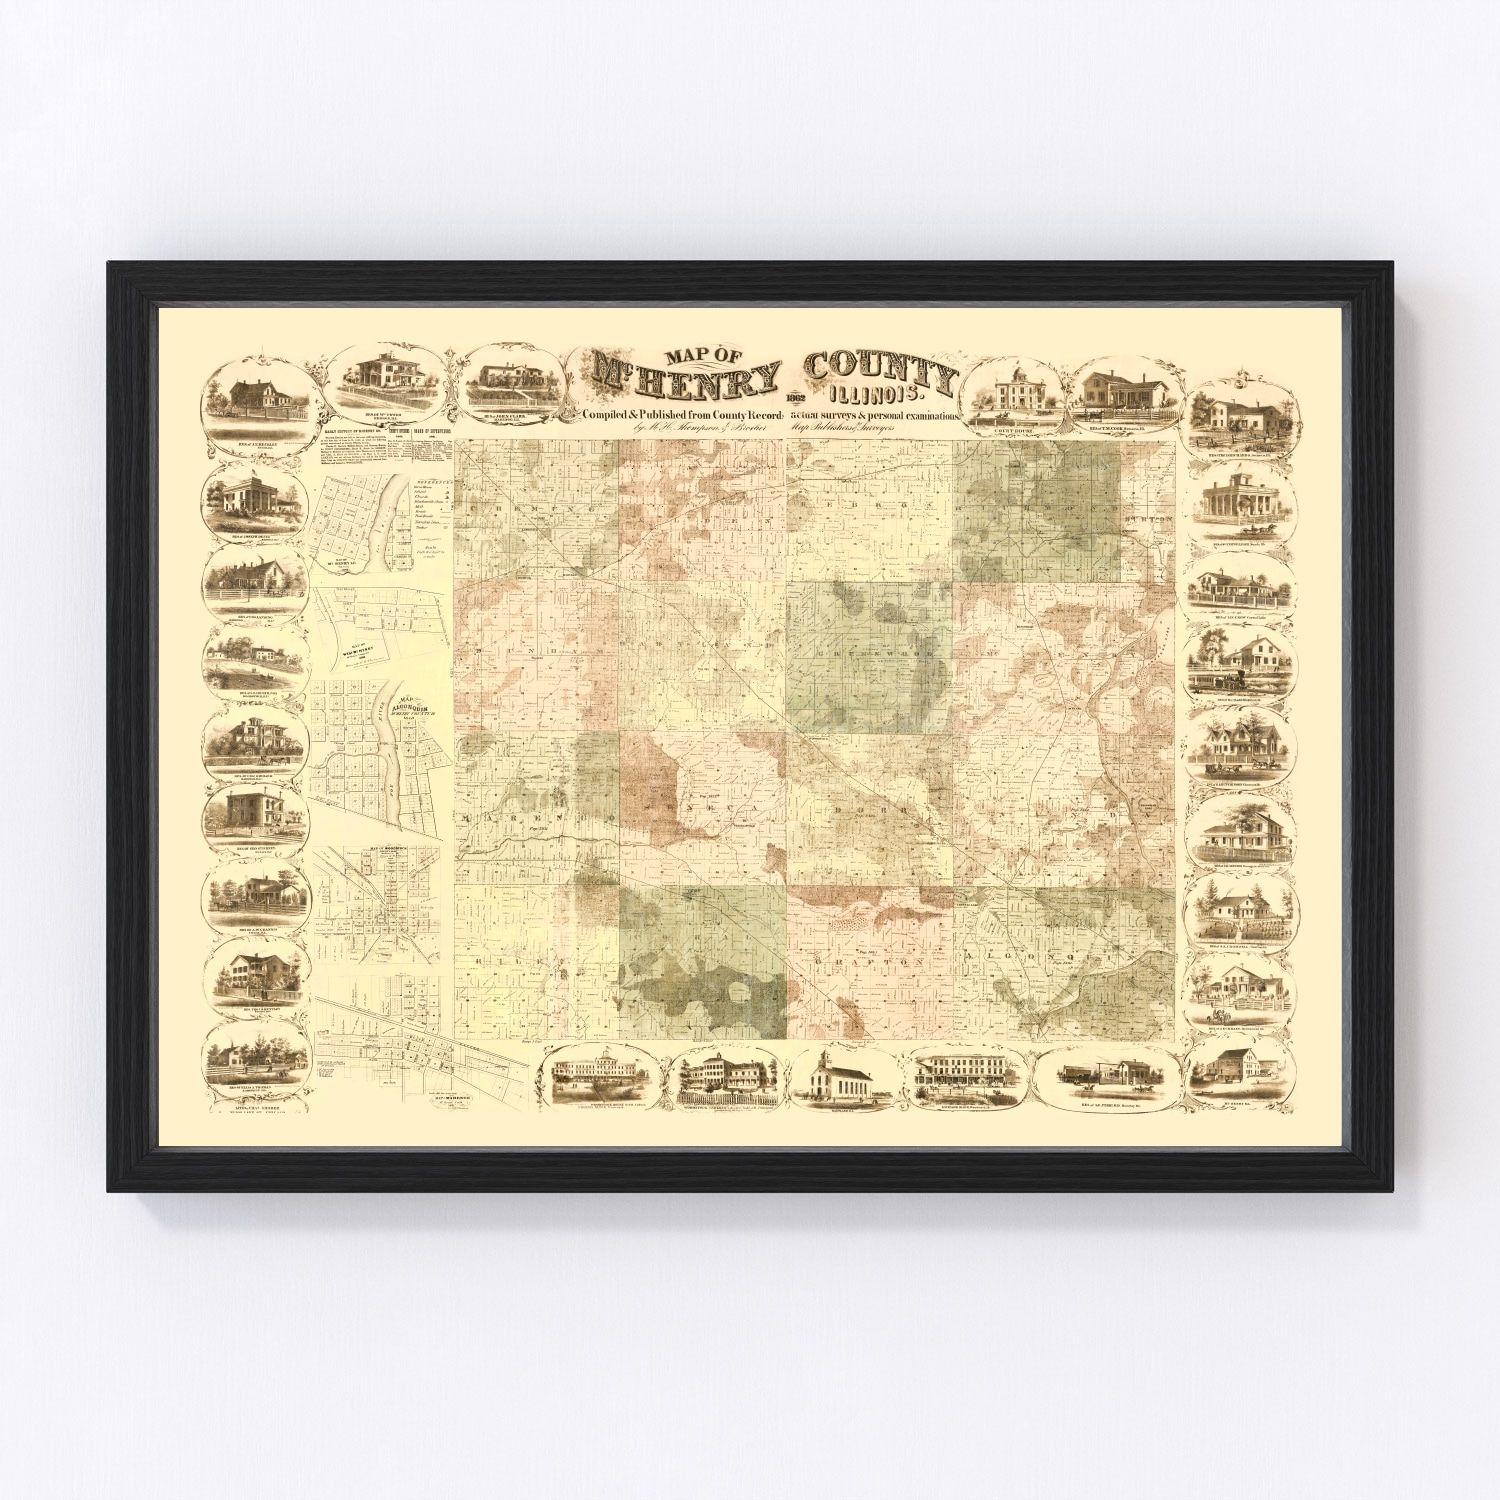 Vintage Map of McHenry County Illinois 1862 by Ted #39 s Vintage Art